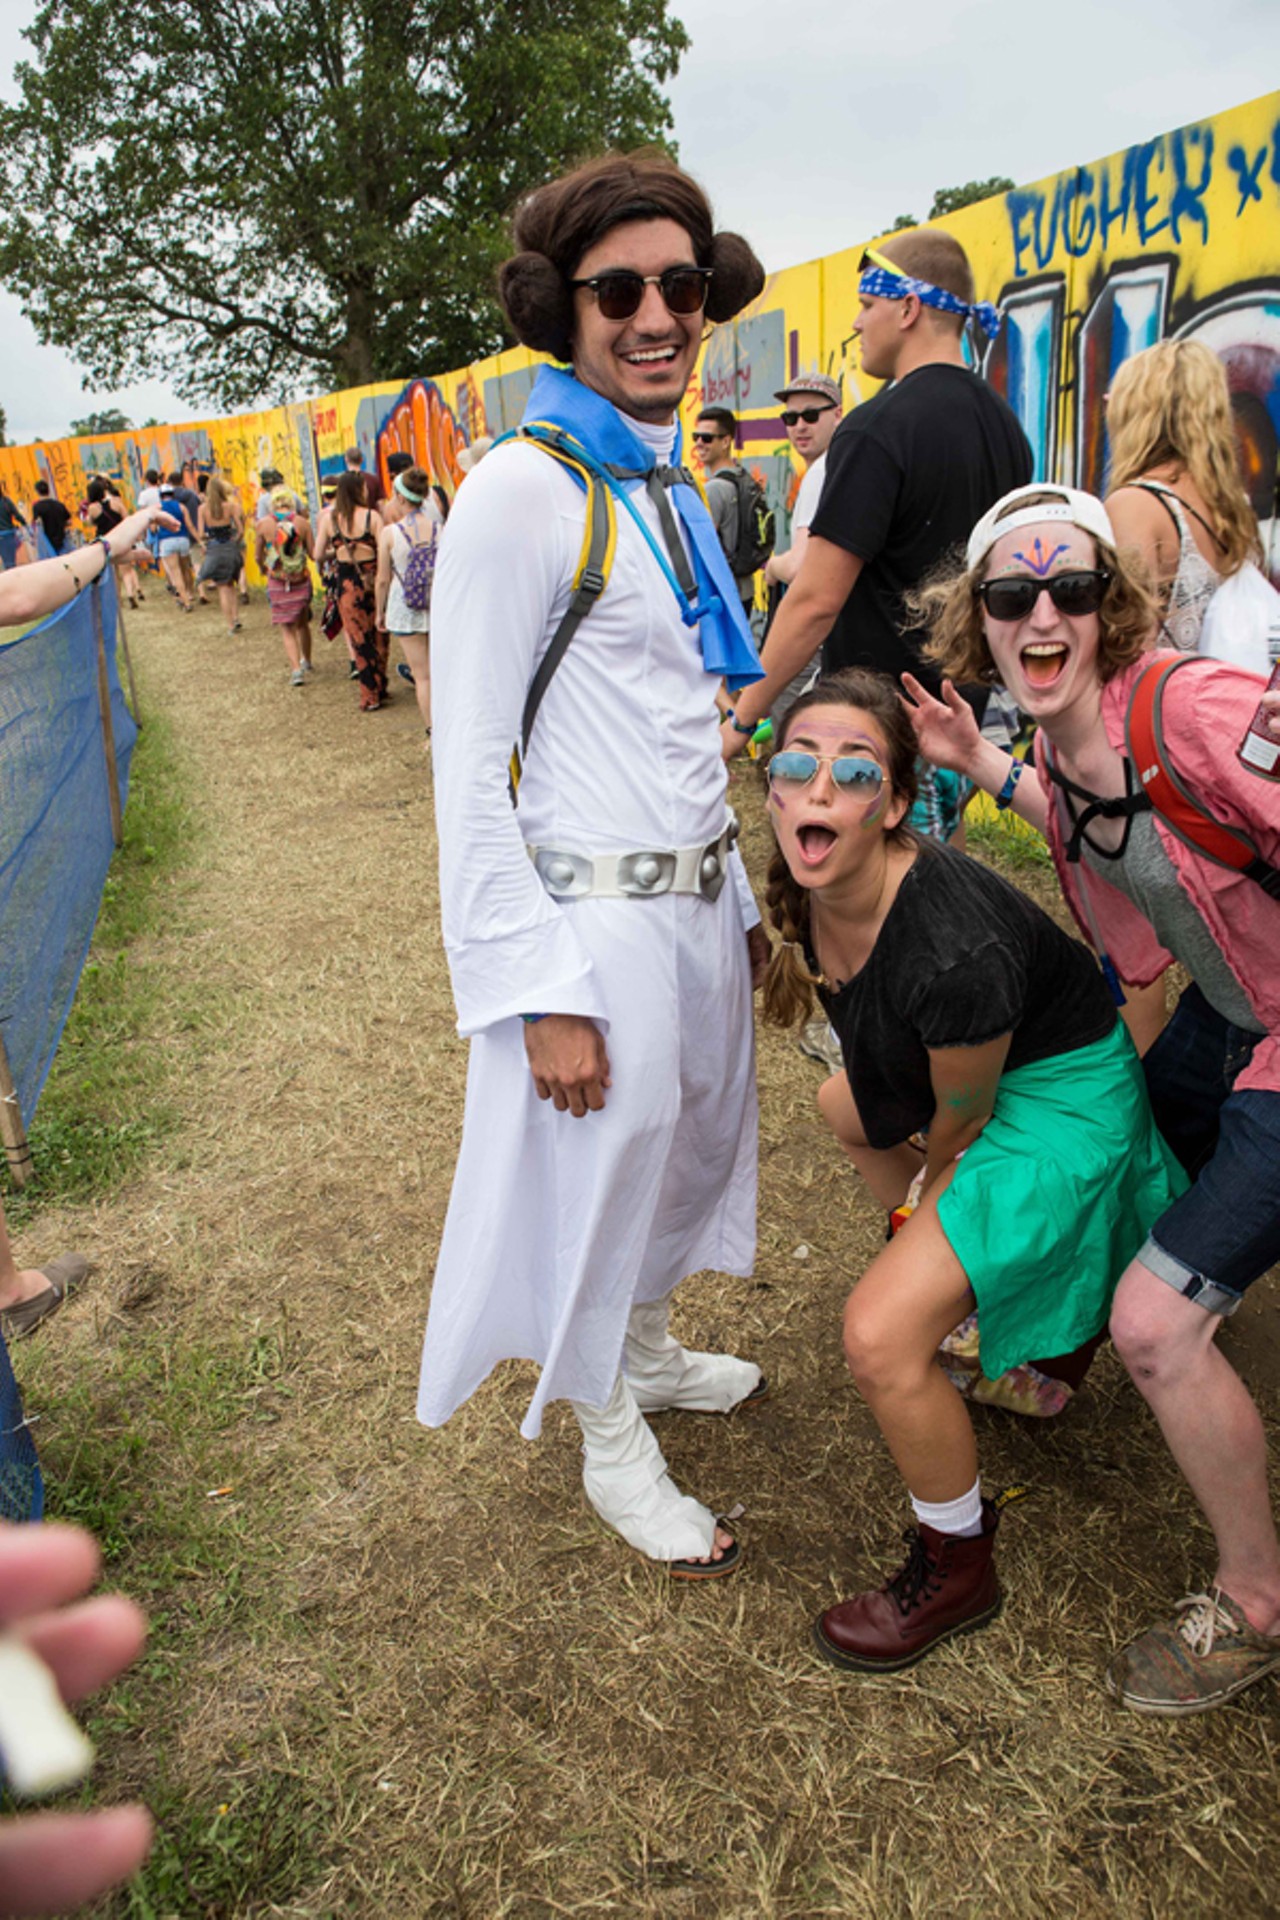 The People of Bonnaroo 2014